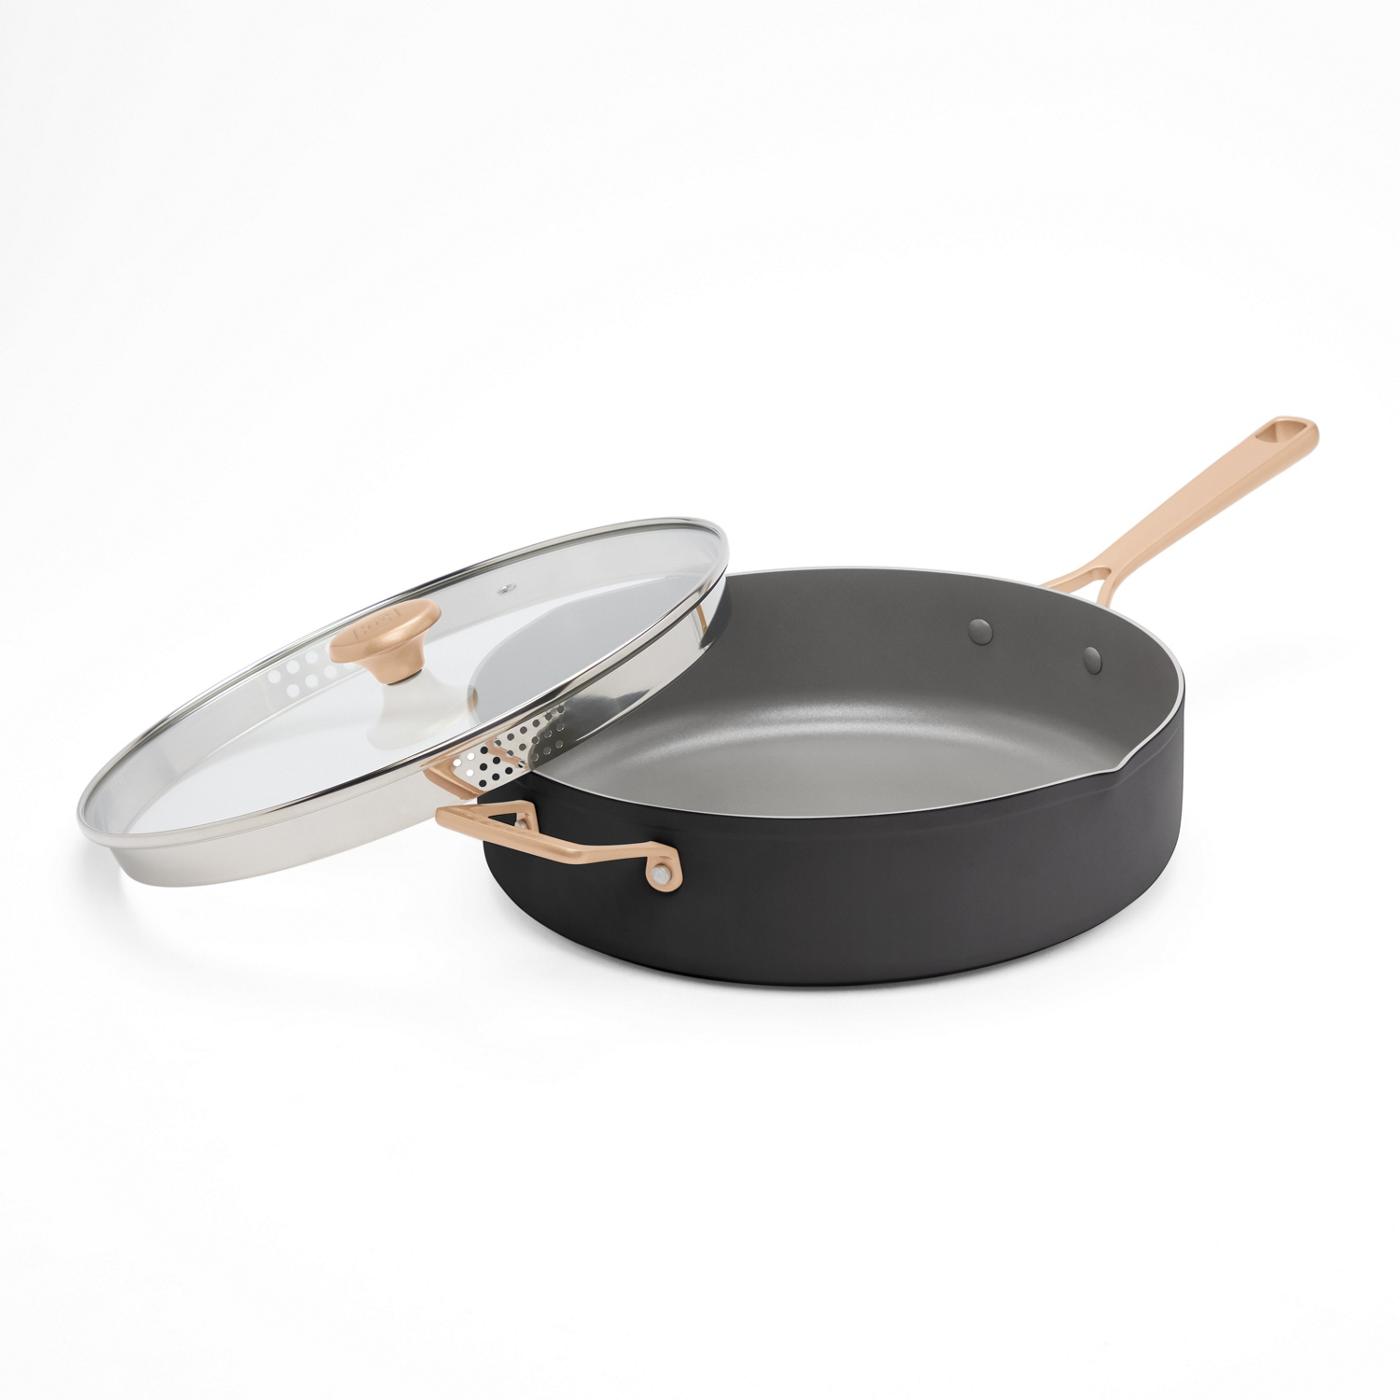 Kitchen & Table by H-E-B Non-Stick Sauté Pan with Strainer Lid - Classic Black; image 1 of 7